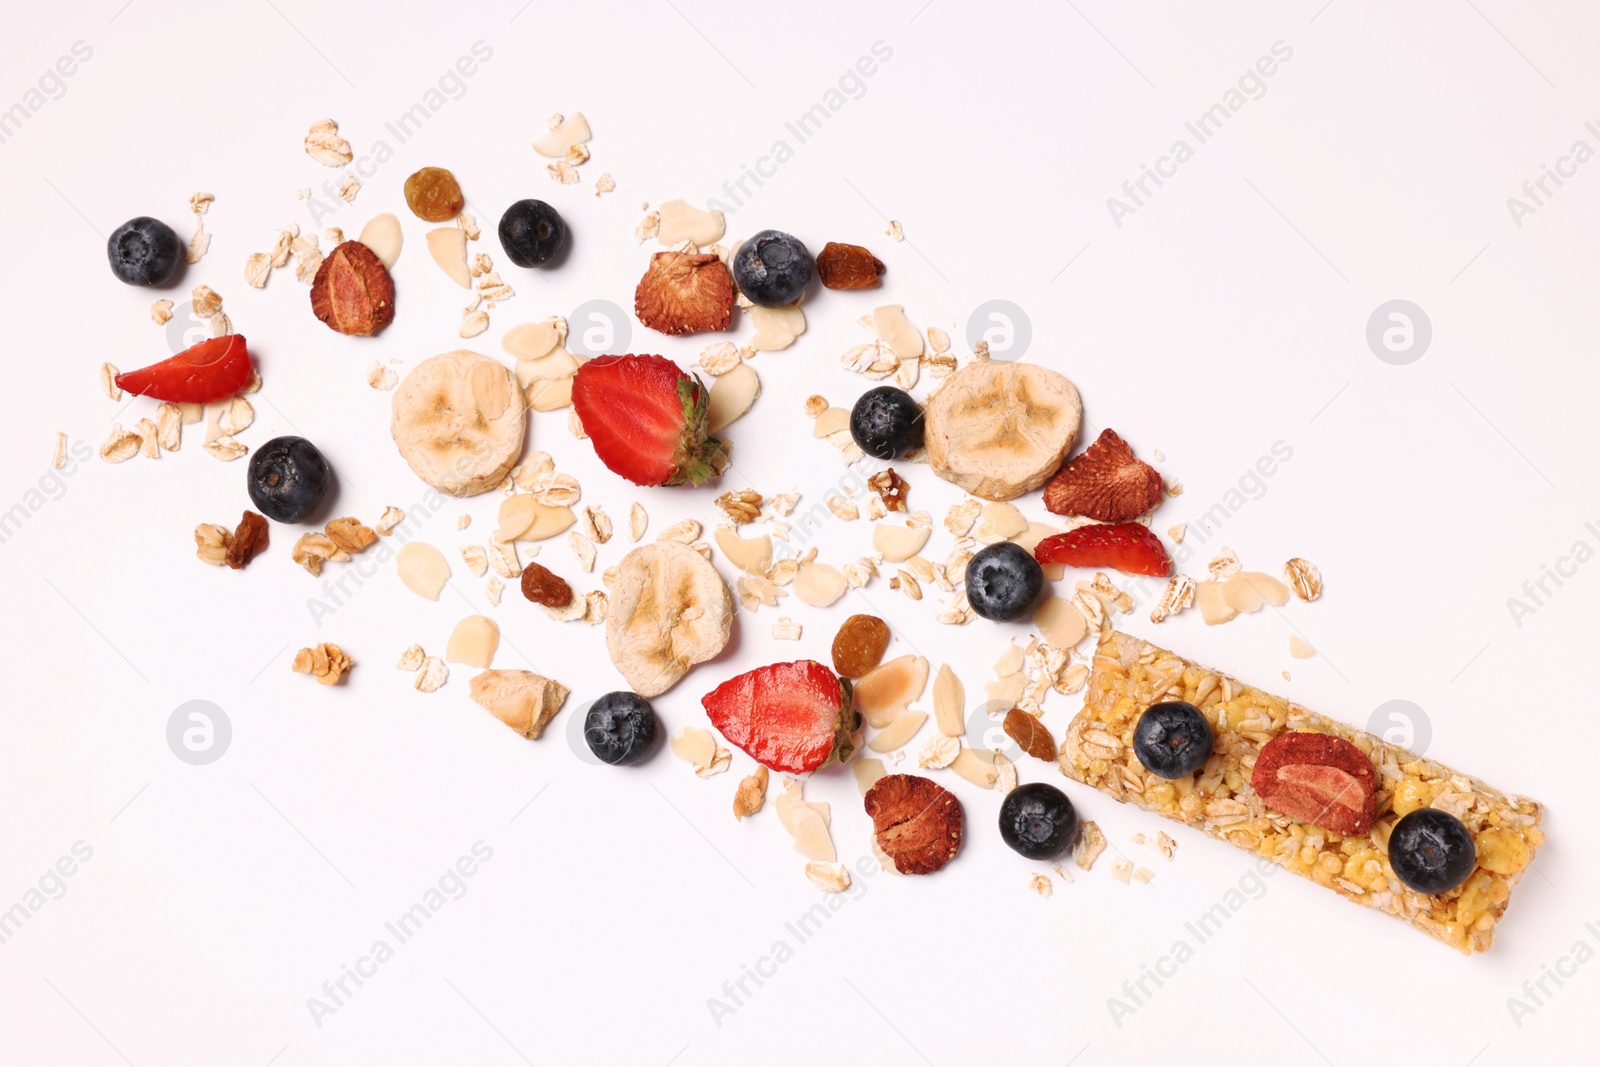 Photo of Tasty granola bar and ingredients isolated on white, top view